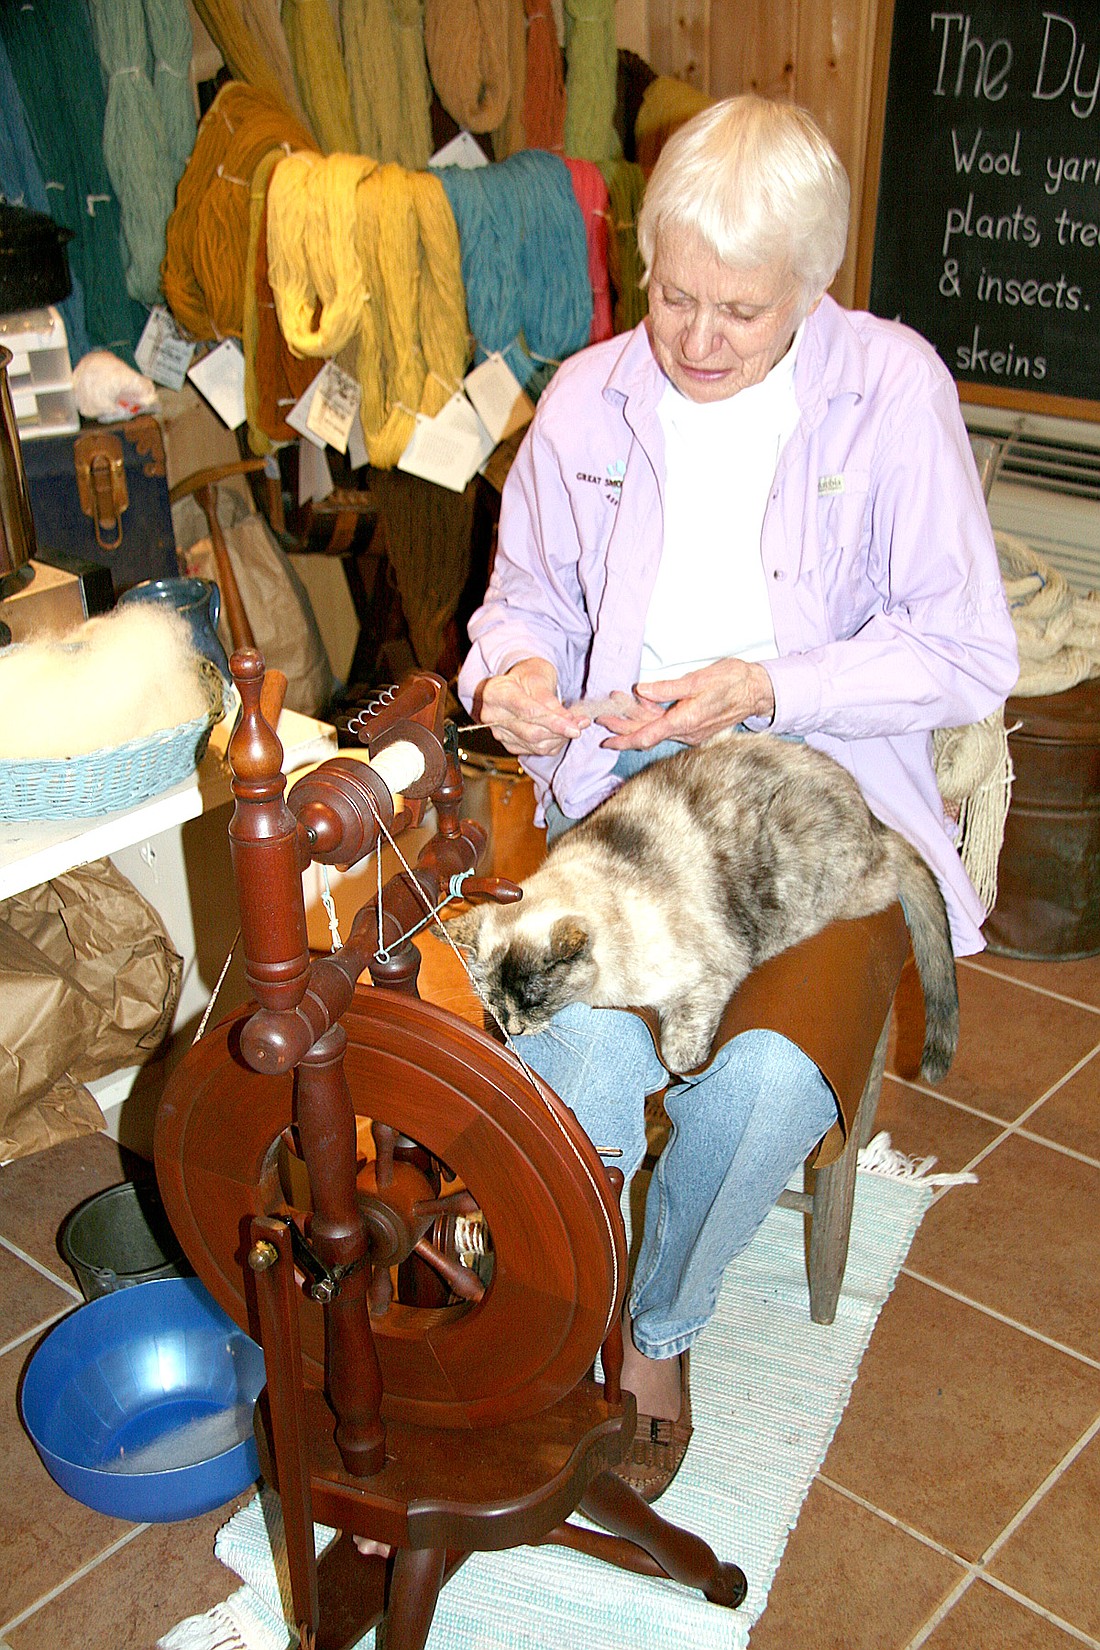 Bette Raymond demonstrates how to use a spinning wheel (with the help of Marble the cat) at Cliff Dwellers Gallery.
Photo courtesy of the Gatlinburg Convention and Visitors Bureau